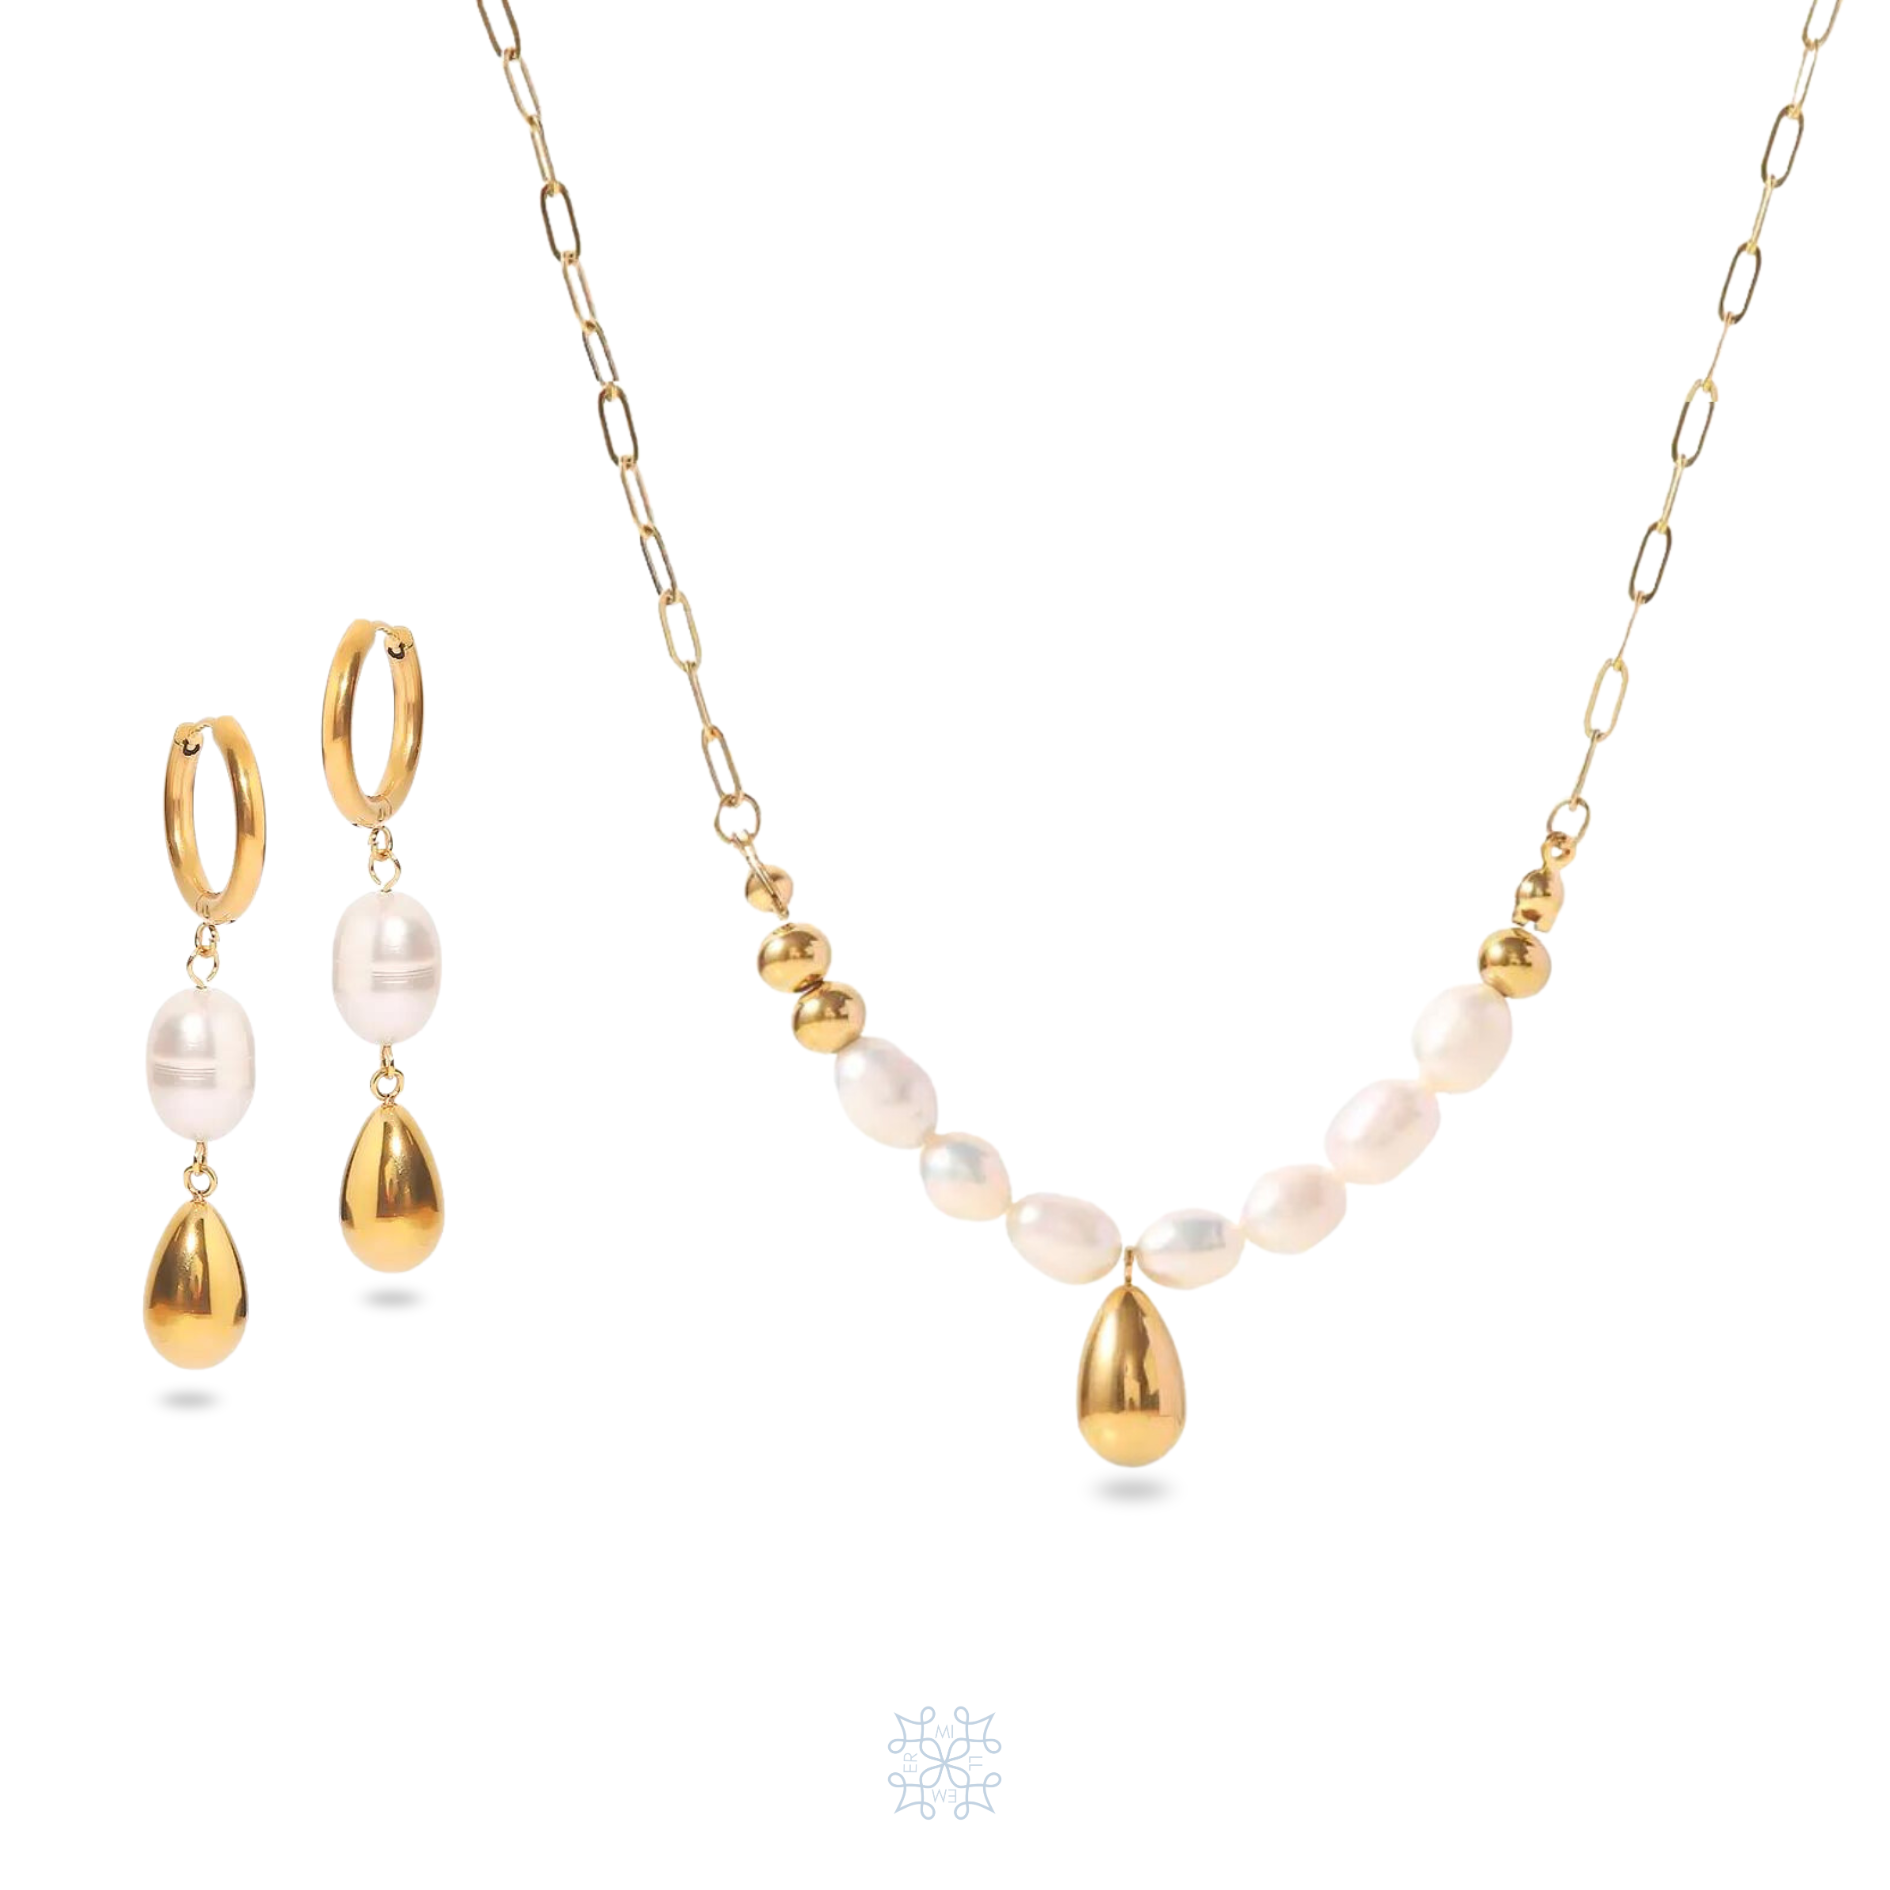 Rain Pearl Gold Set. Jewelry set with a pair of earrings and necklace. The earrings have a small huggie where a pearl drop form the gold huggies and a waterdrop shape gold metal drop from the white pearl creating a drop earrings. Similar design has the necklace. Whote pearls and a waterdrop gold metal shape pendant drop in the middle of the pearls. The pearls are attchaed with chains in both sides of the necklace.